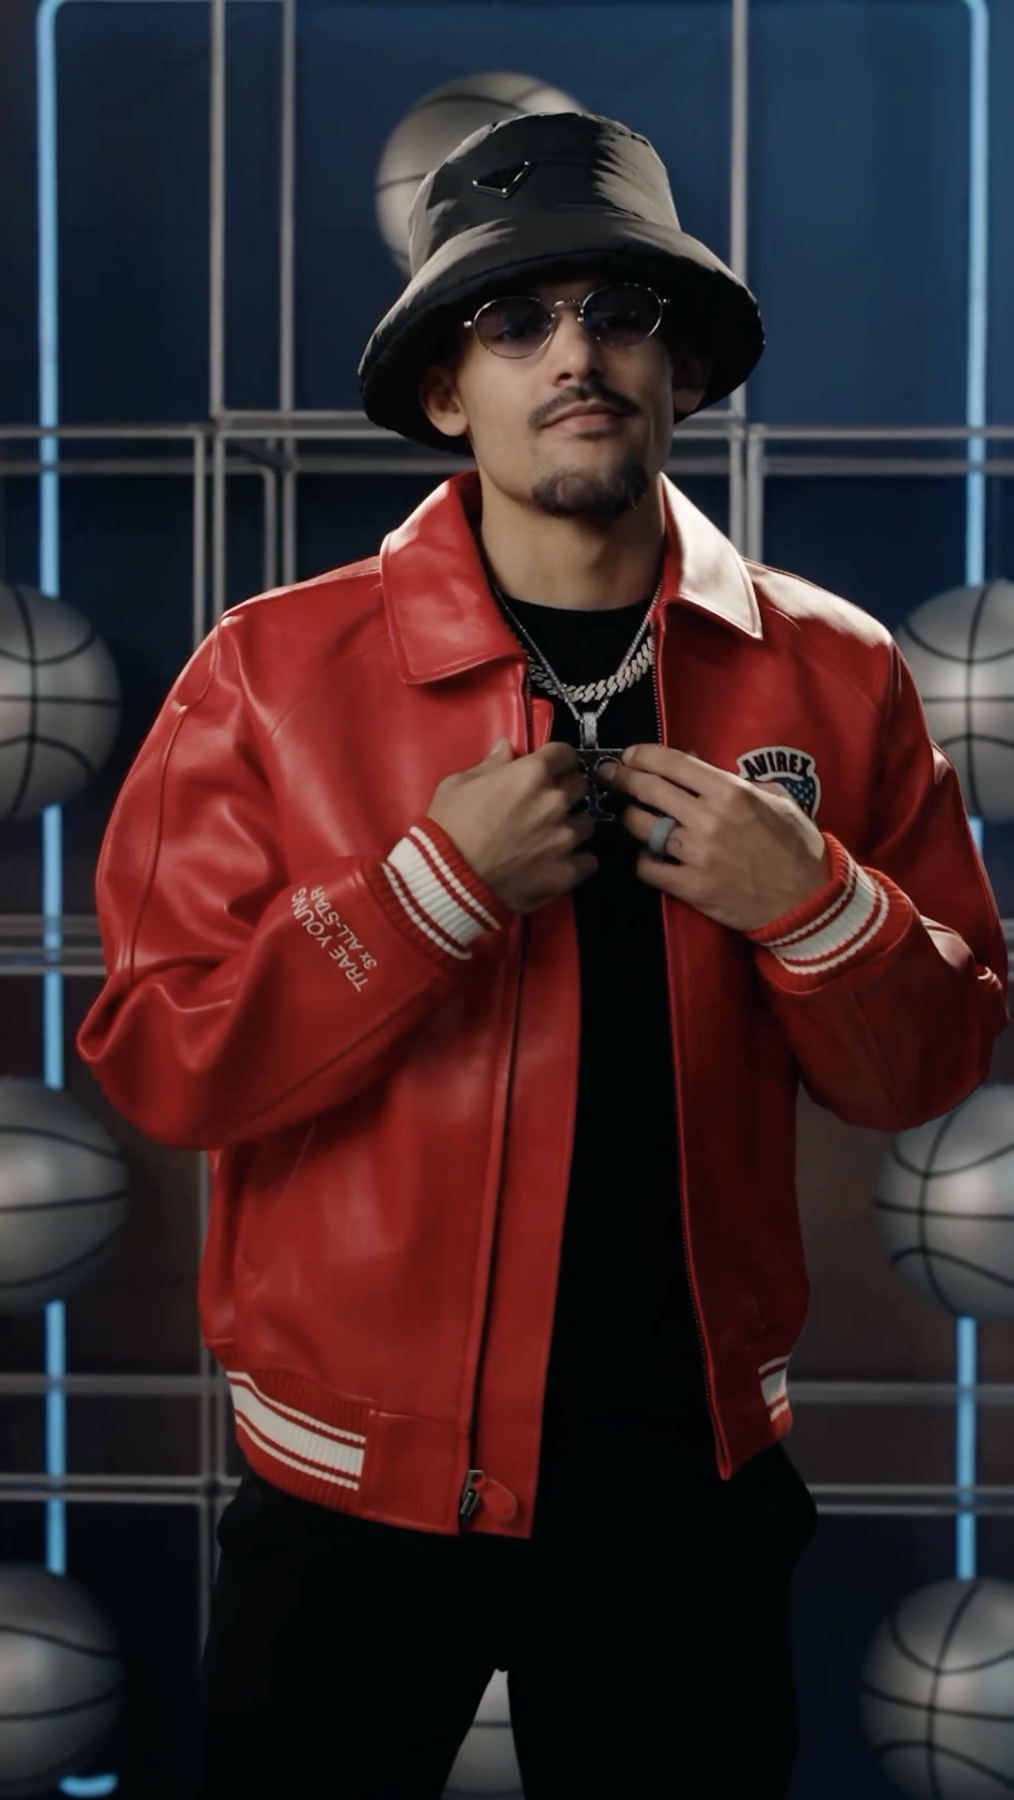 NBA All-Star Game Outfits: Trae Young